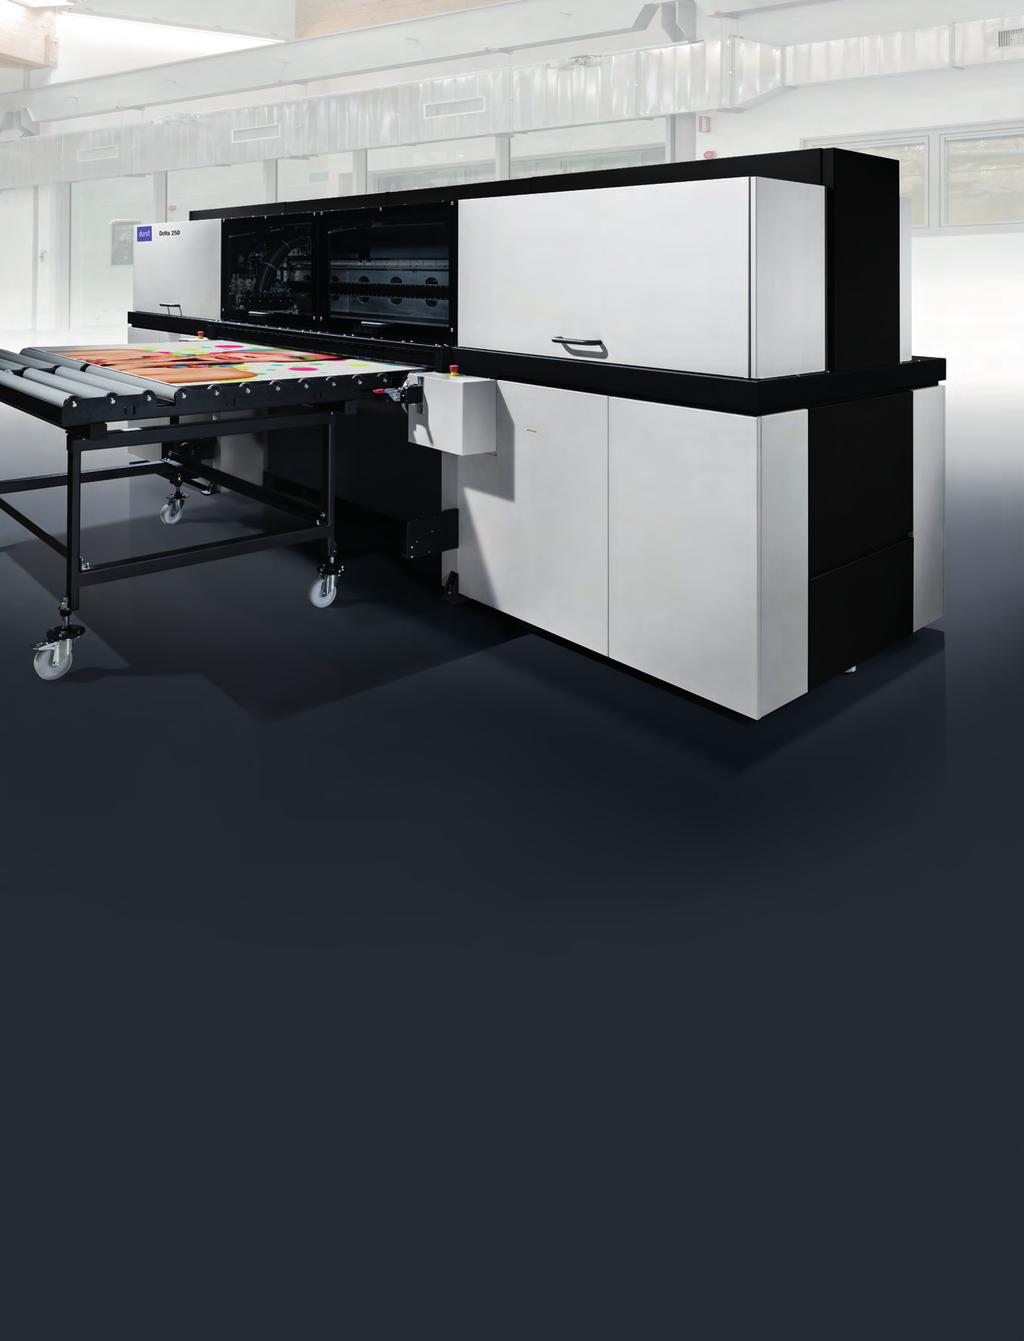 Delta 250 Delta Multi-Pass UV printing system print with a resolution of 1000 dpi and offer additional process colors like light cyan, light magenta, orange and purple or orange and green, in order